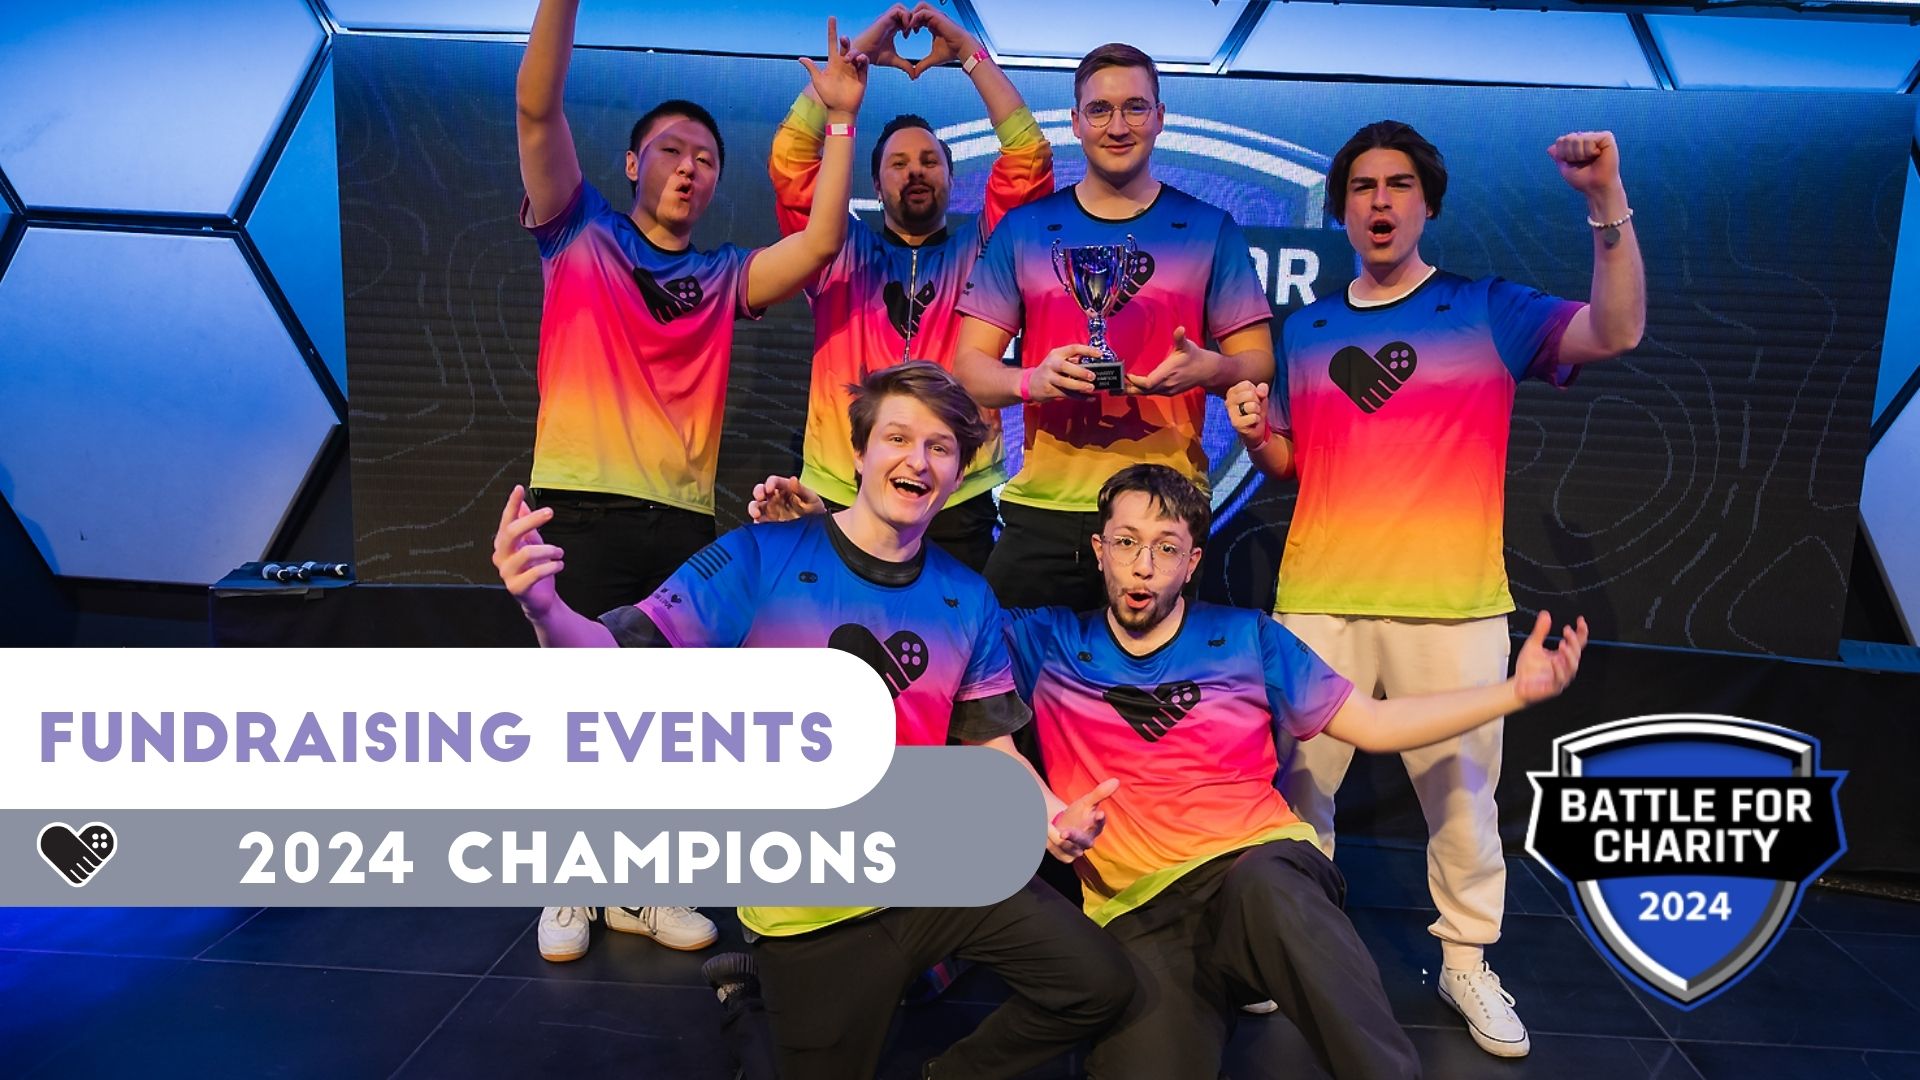 Games For Love wins Lanfest's Battle For Charity 2024